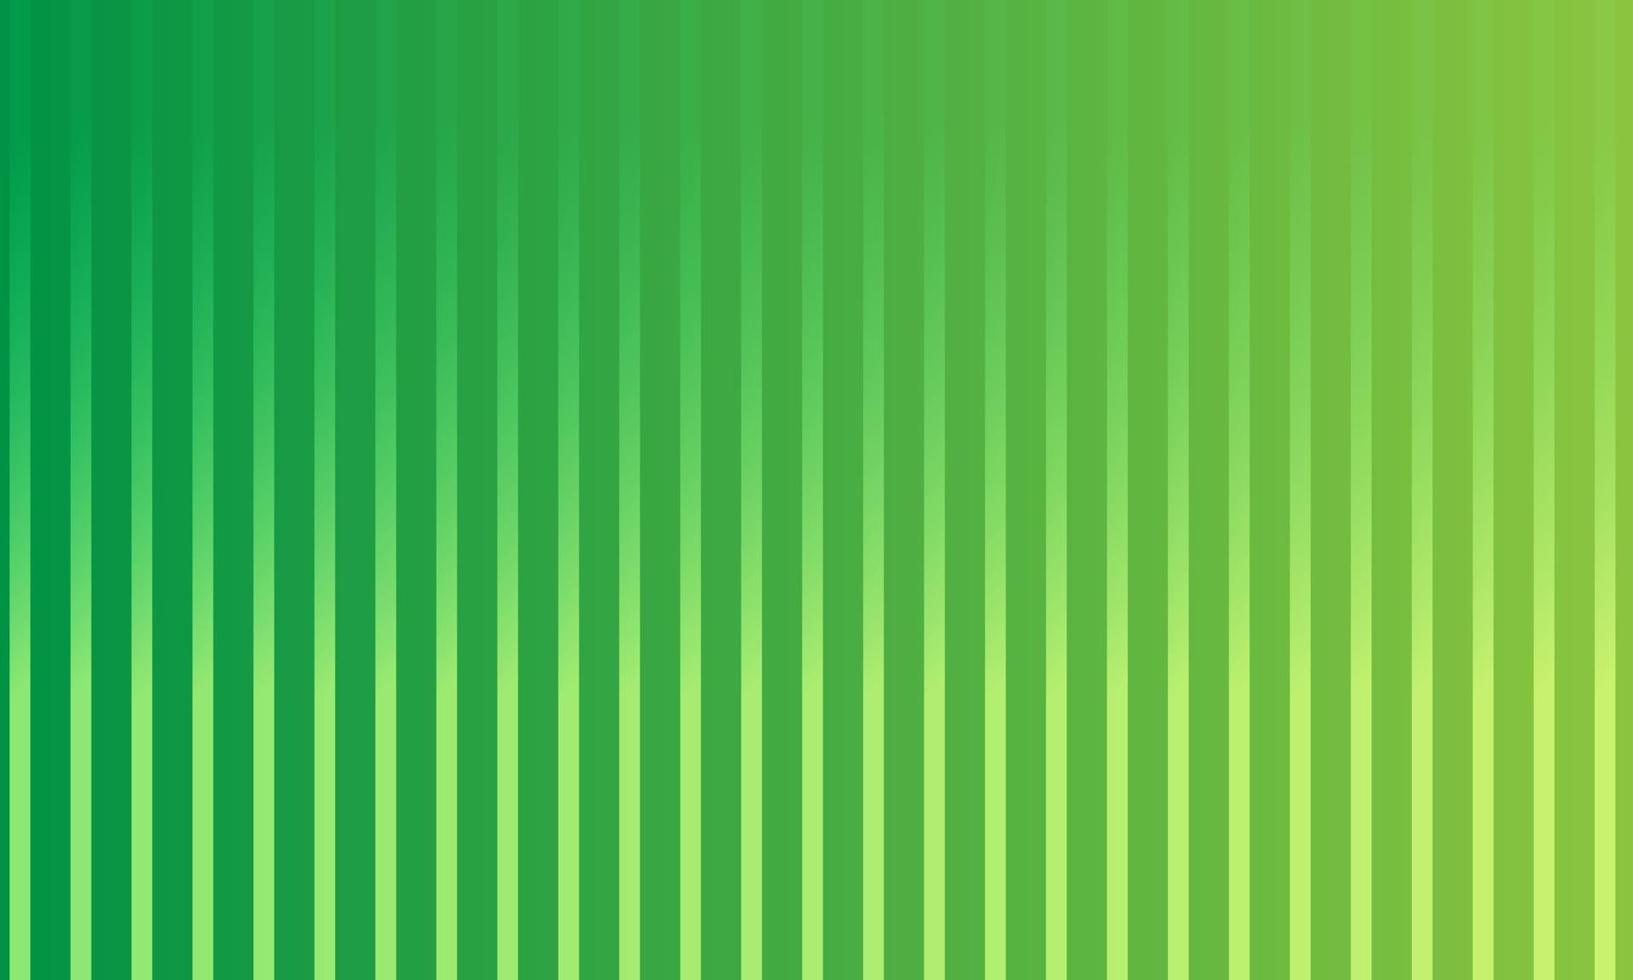 Abstract Green Striped Banner Background vector